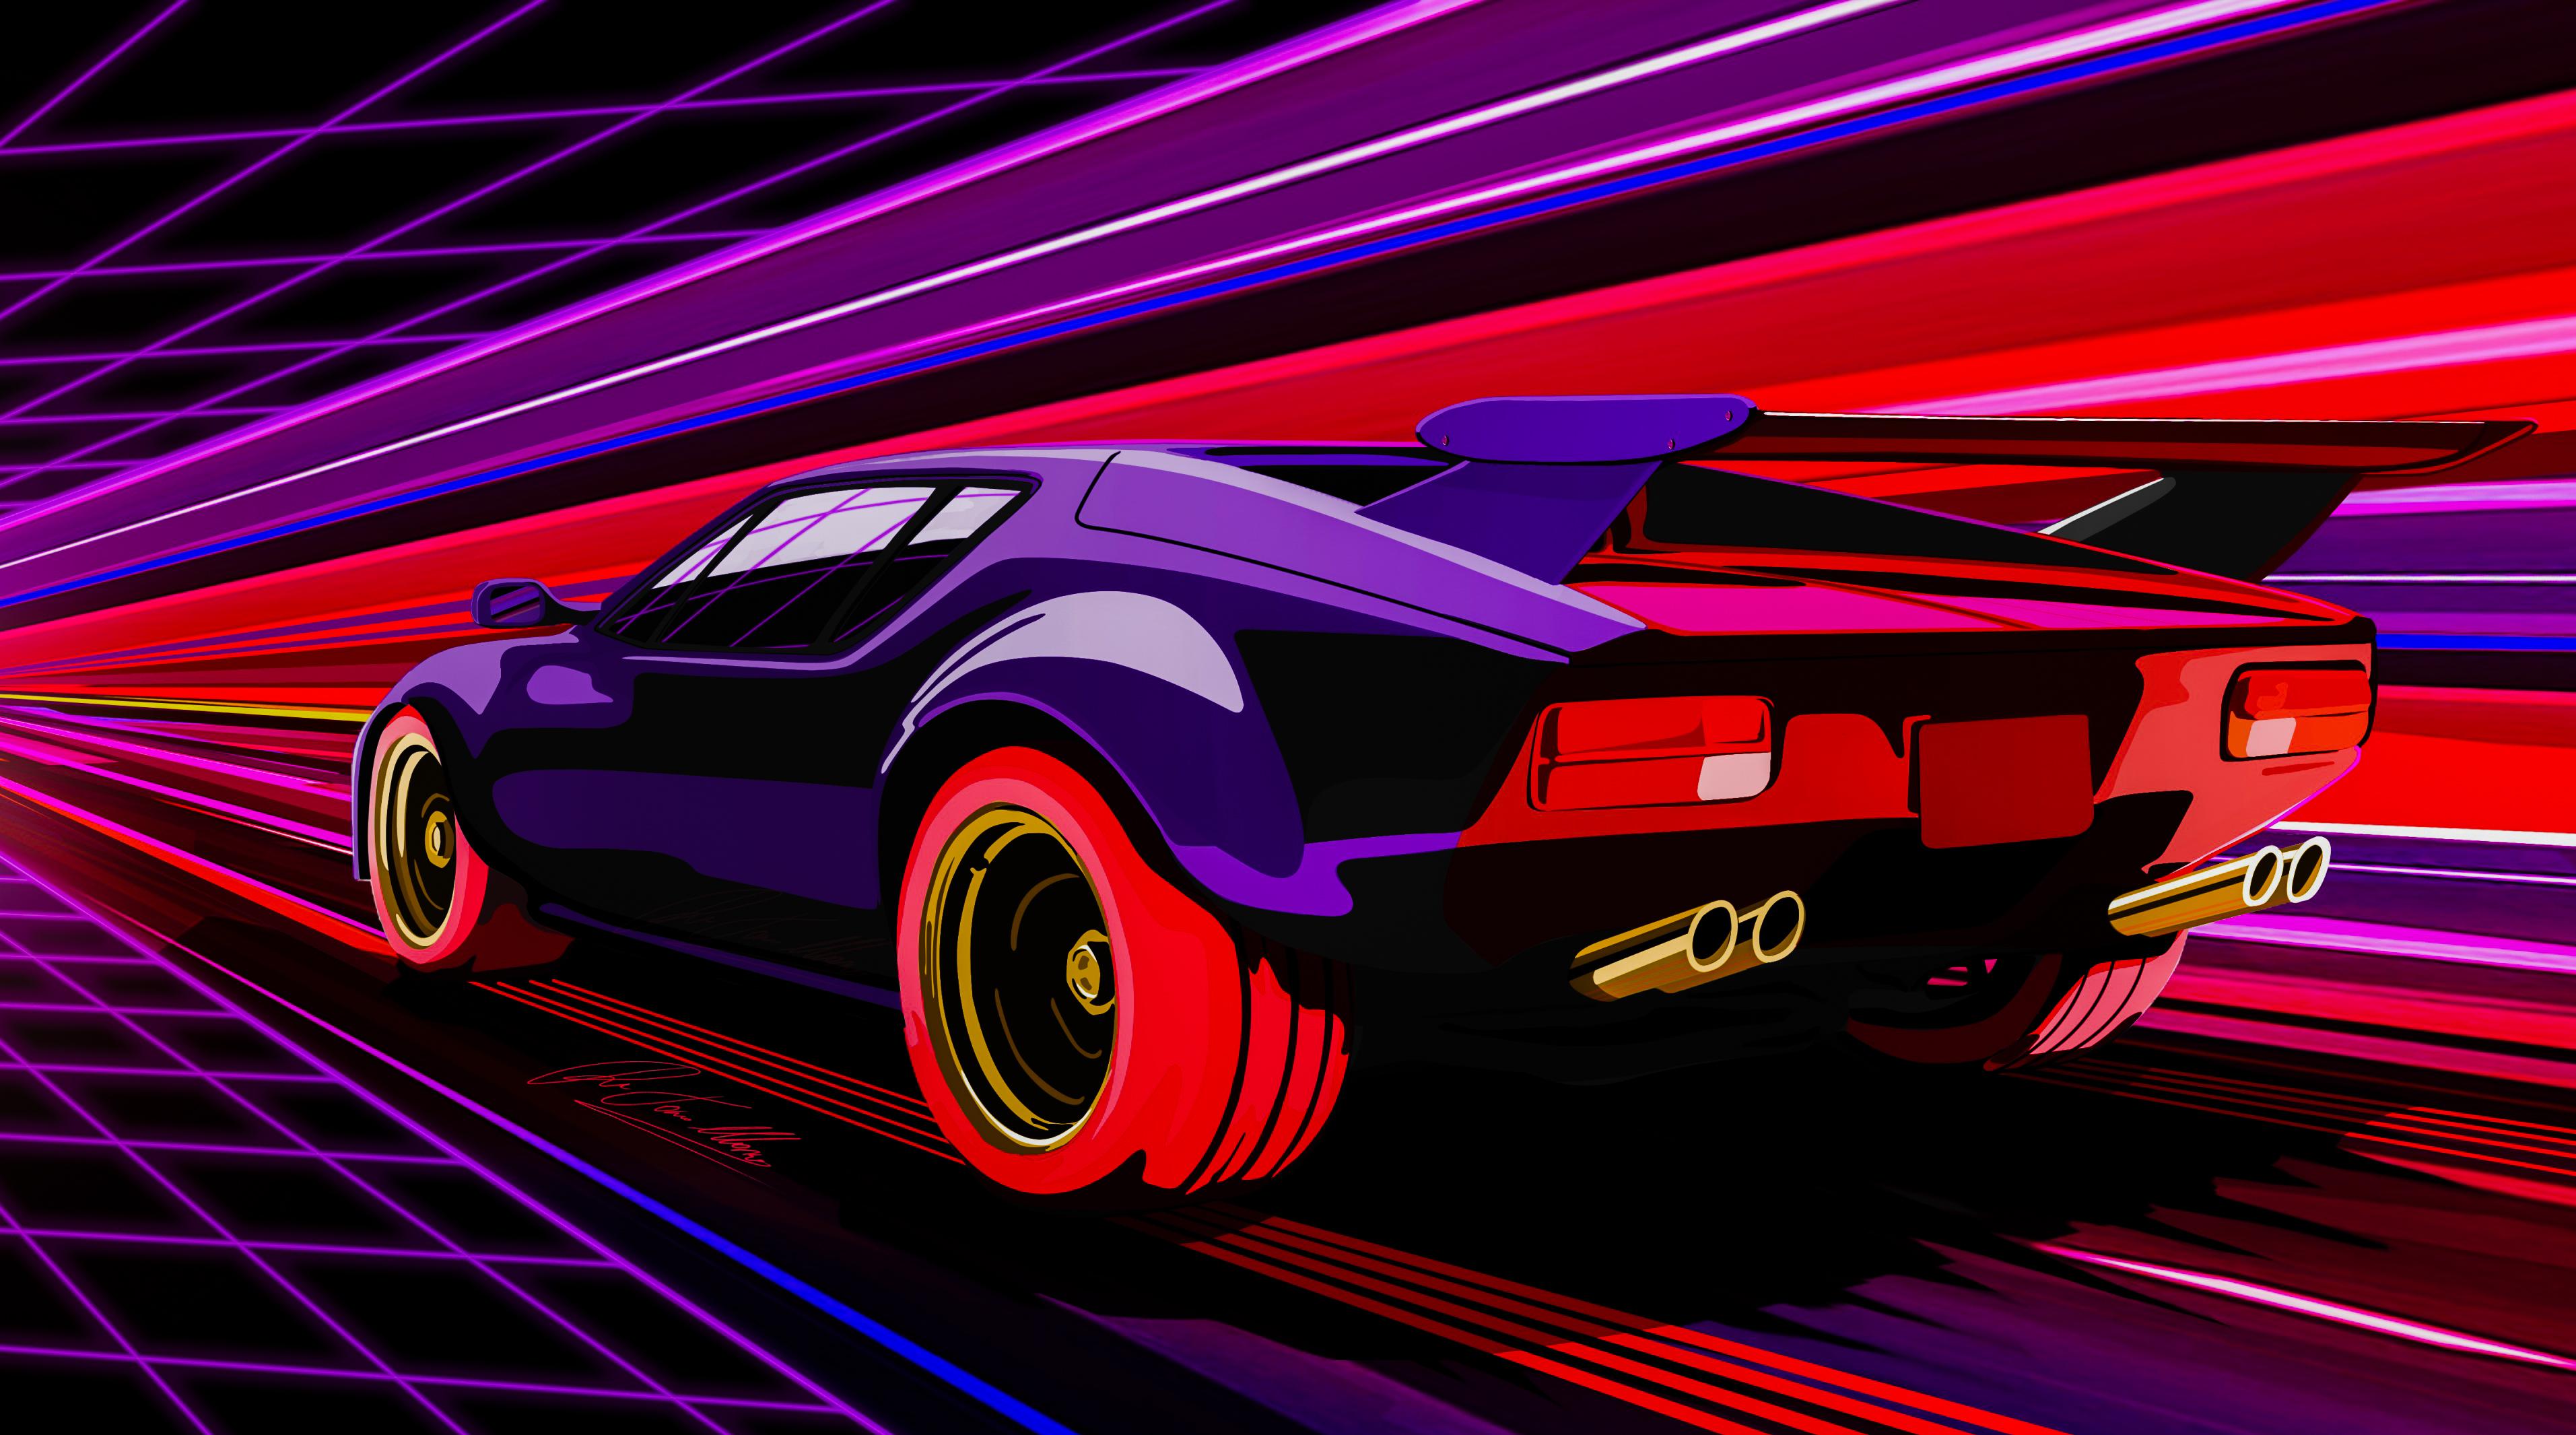 Fast 4K wallpaper for your desktop or mobile screen free and easy